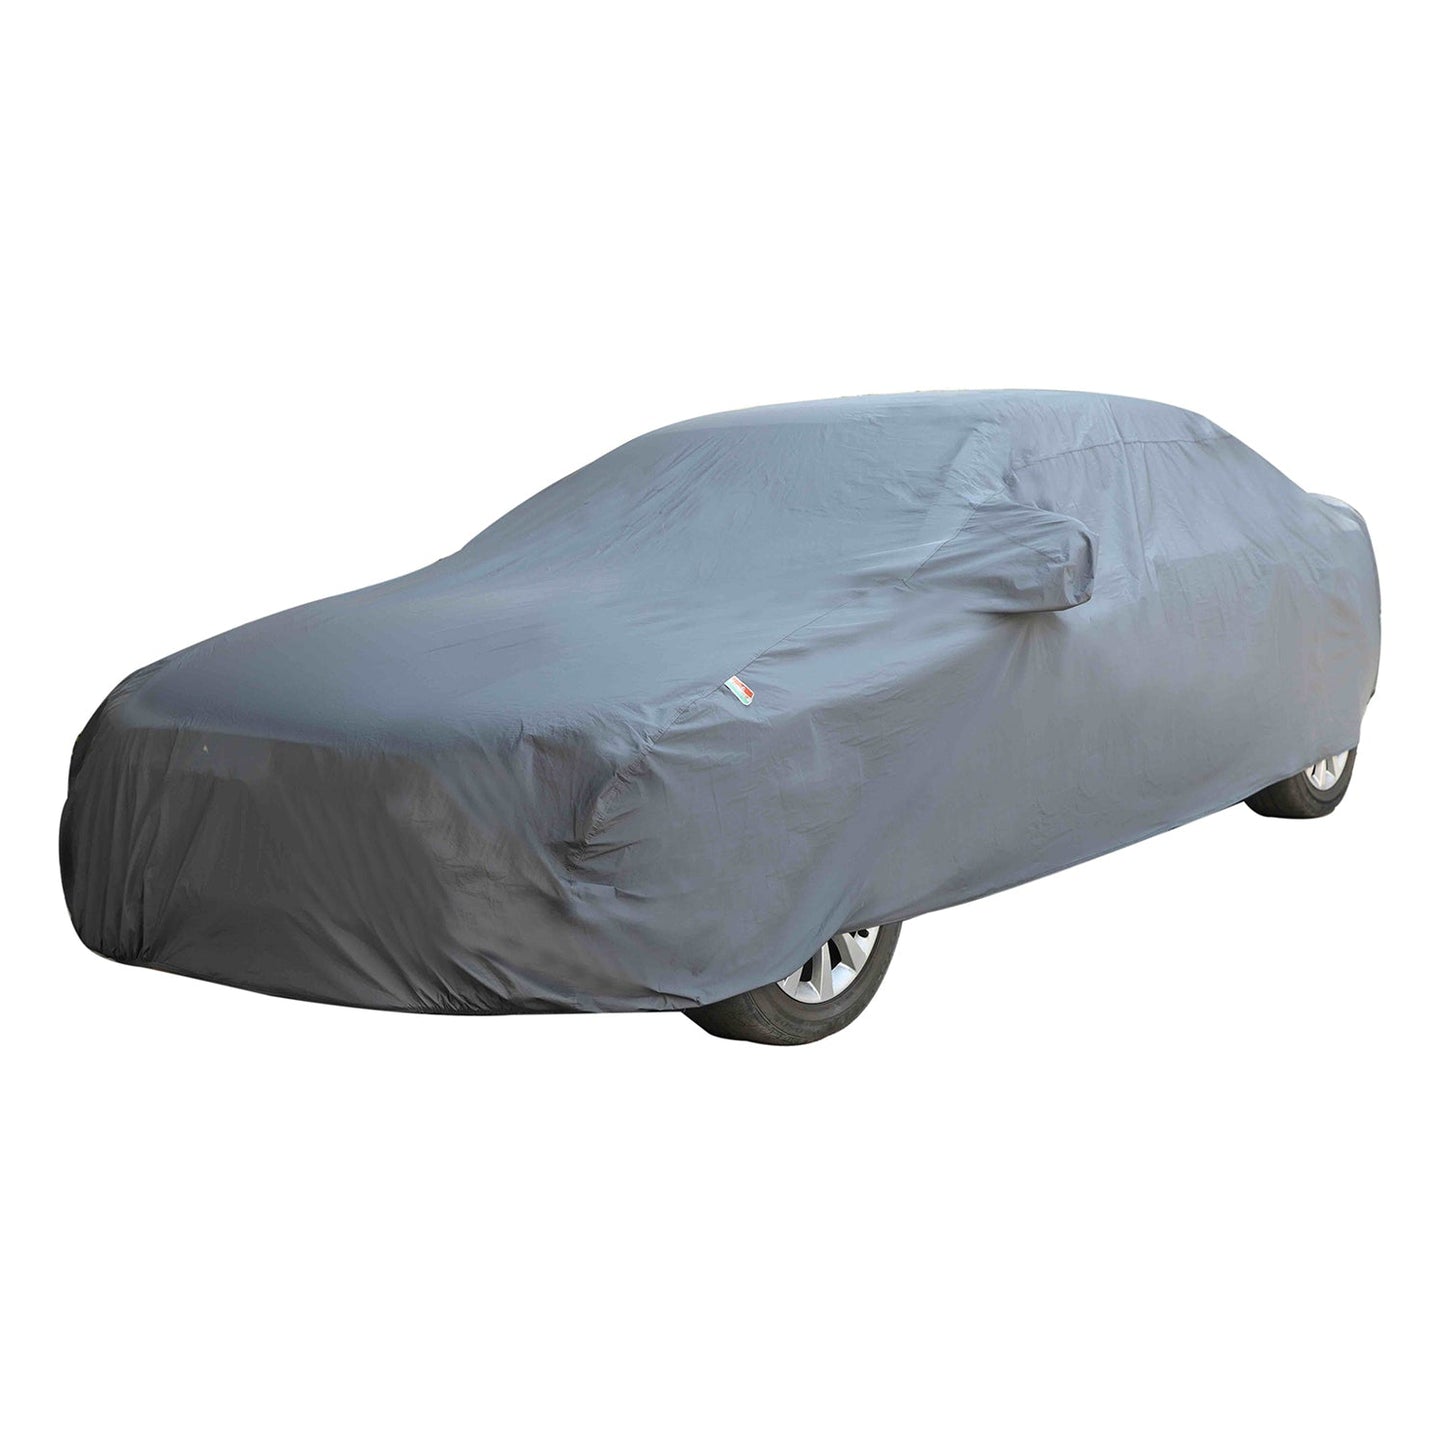 Oshotto Dark Grey 100% Anti Reflective, dustproof and Water Proof Car Body Cover with Mirror Pocket For Chevrolet Uva Old/Uva Sail